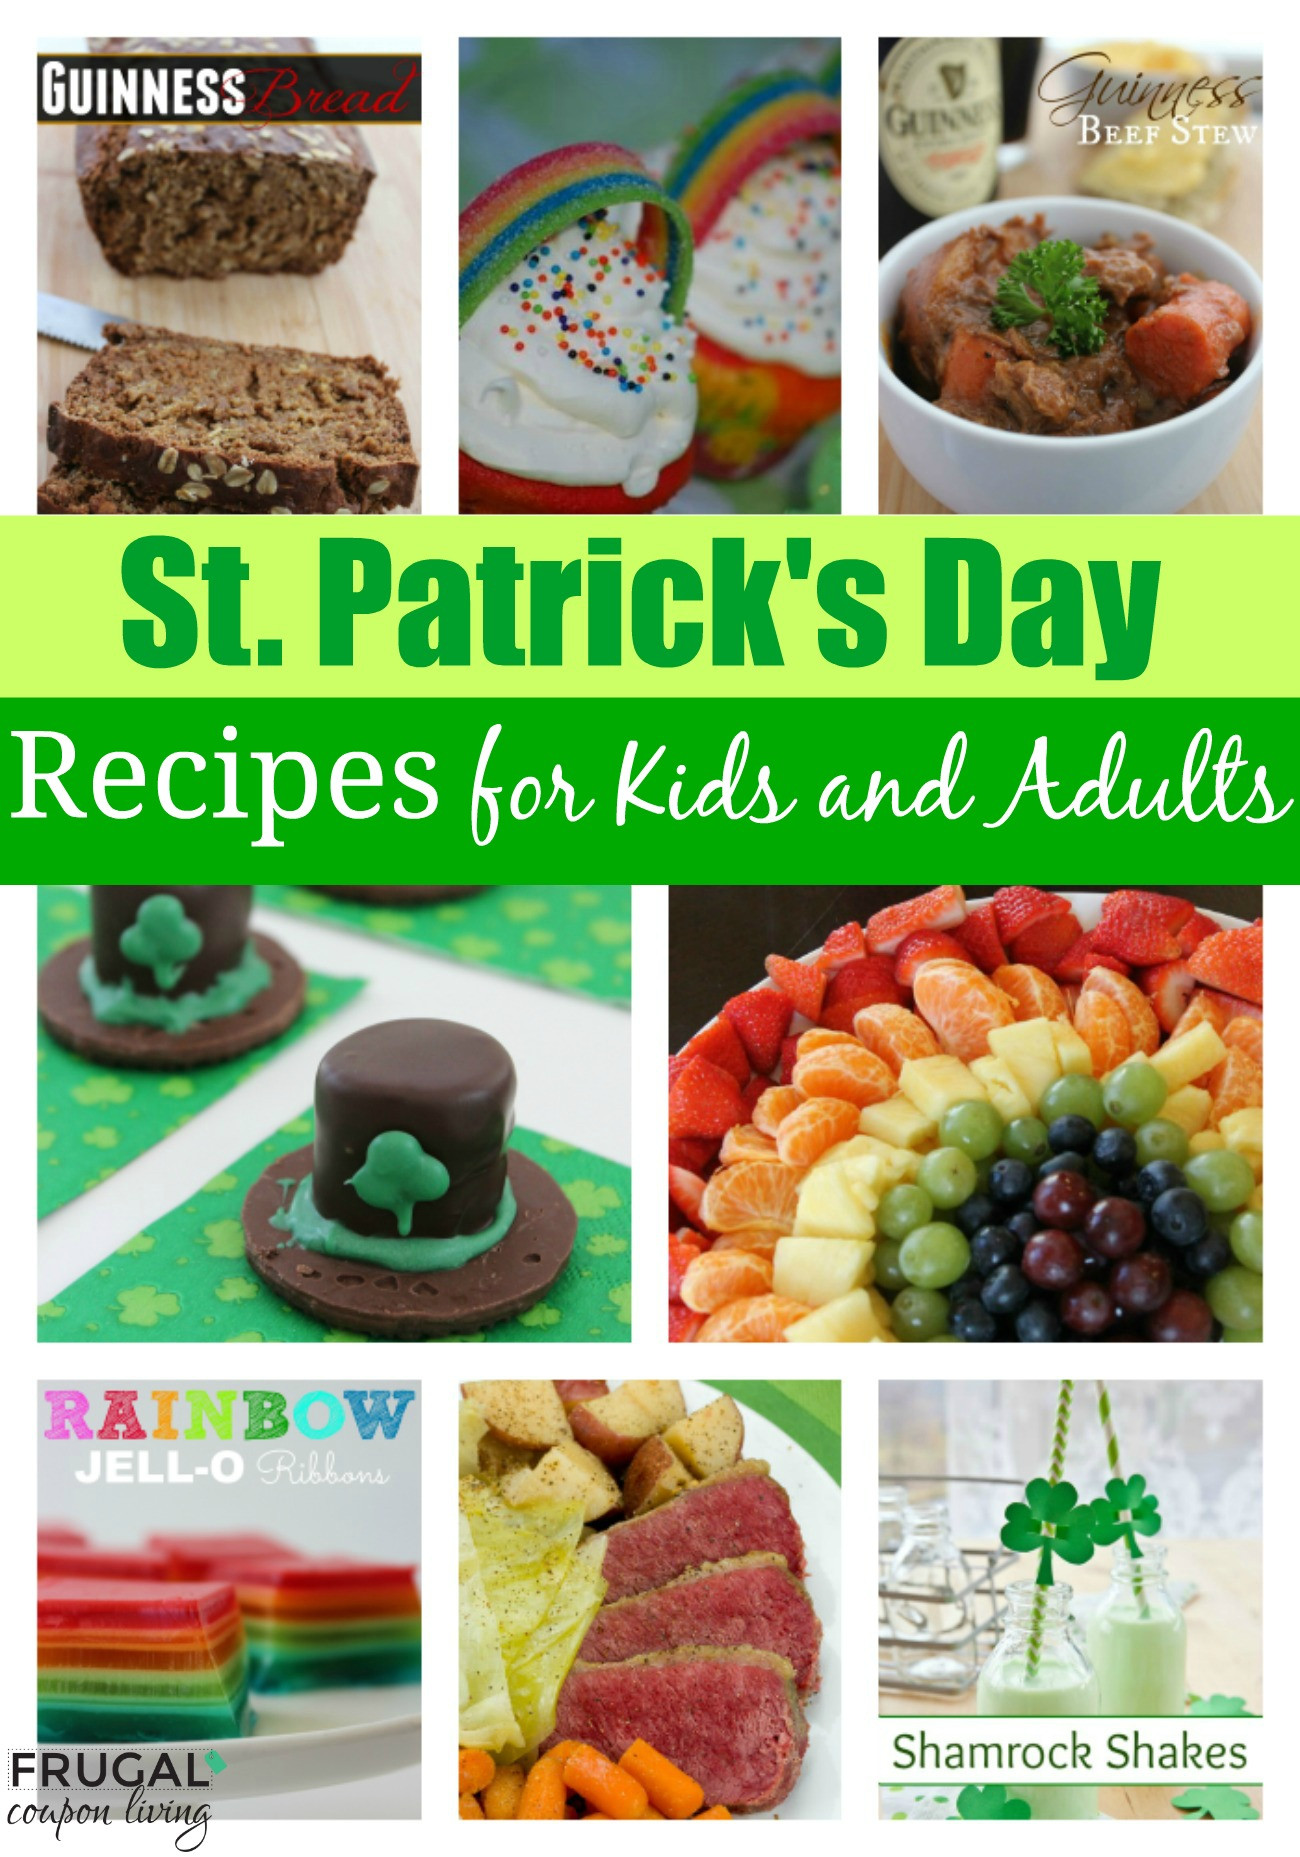 St Patrick's Day Meal Ideas
 St Patrick s Day Food Ideas for Kids and Adults